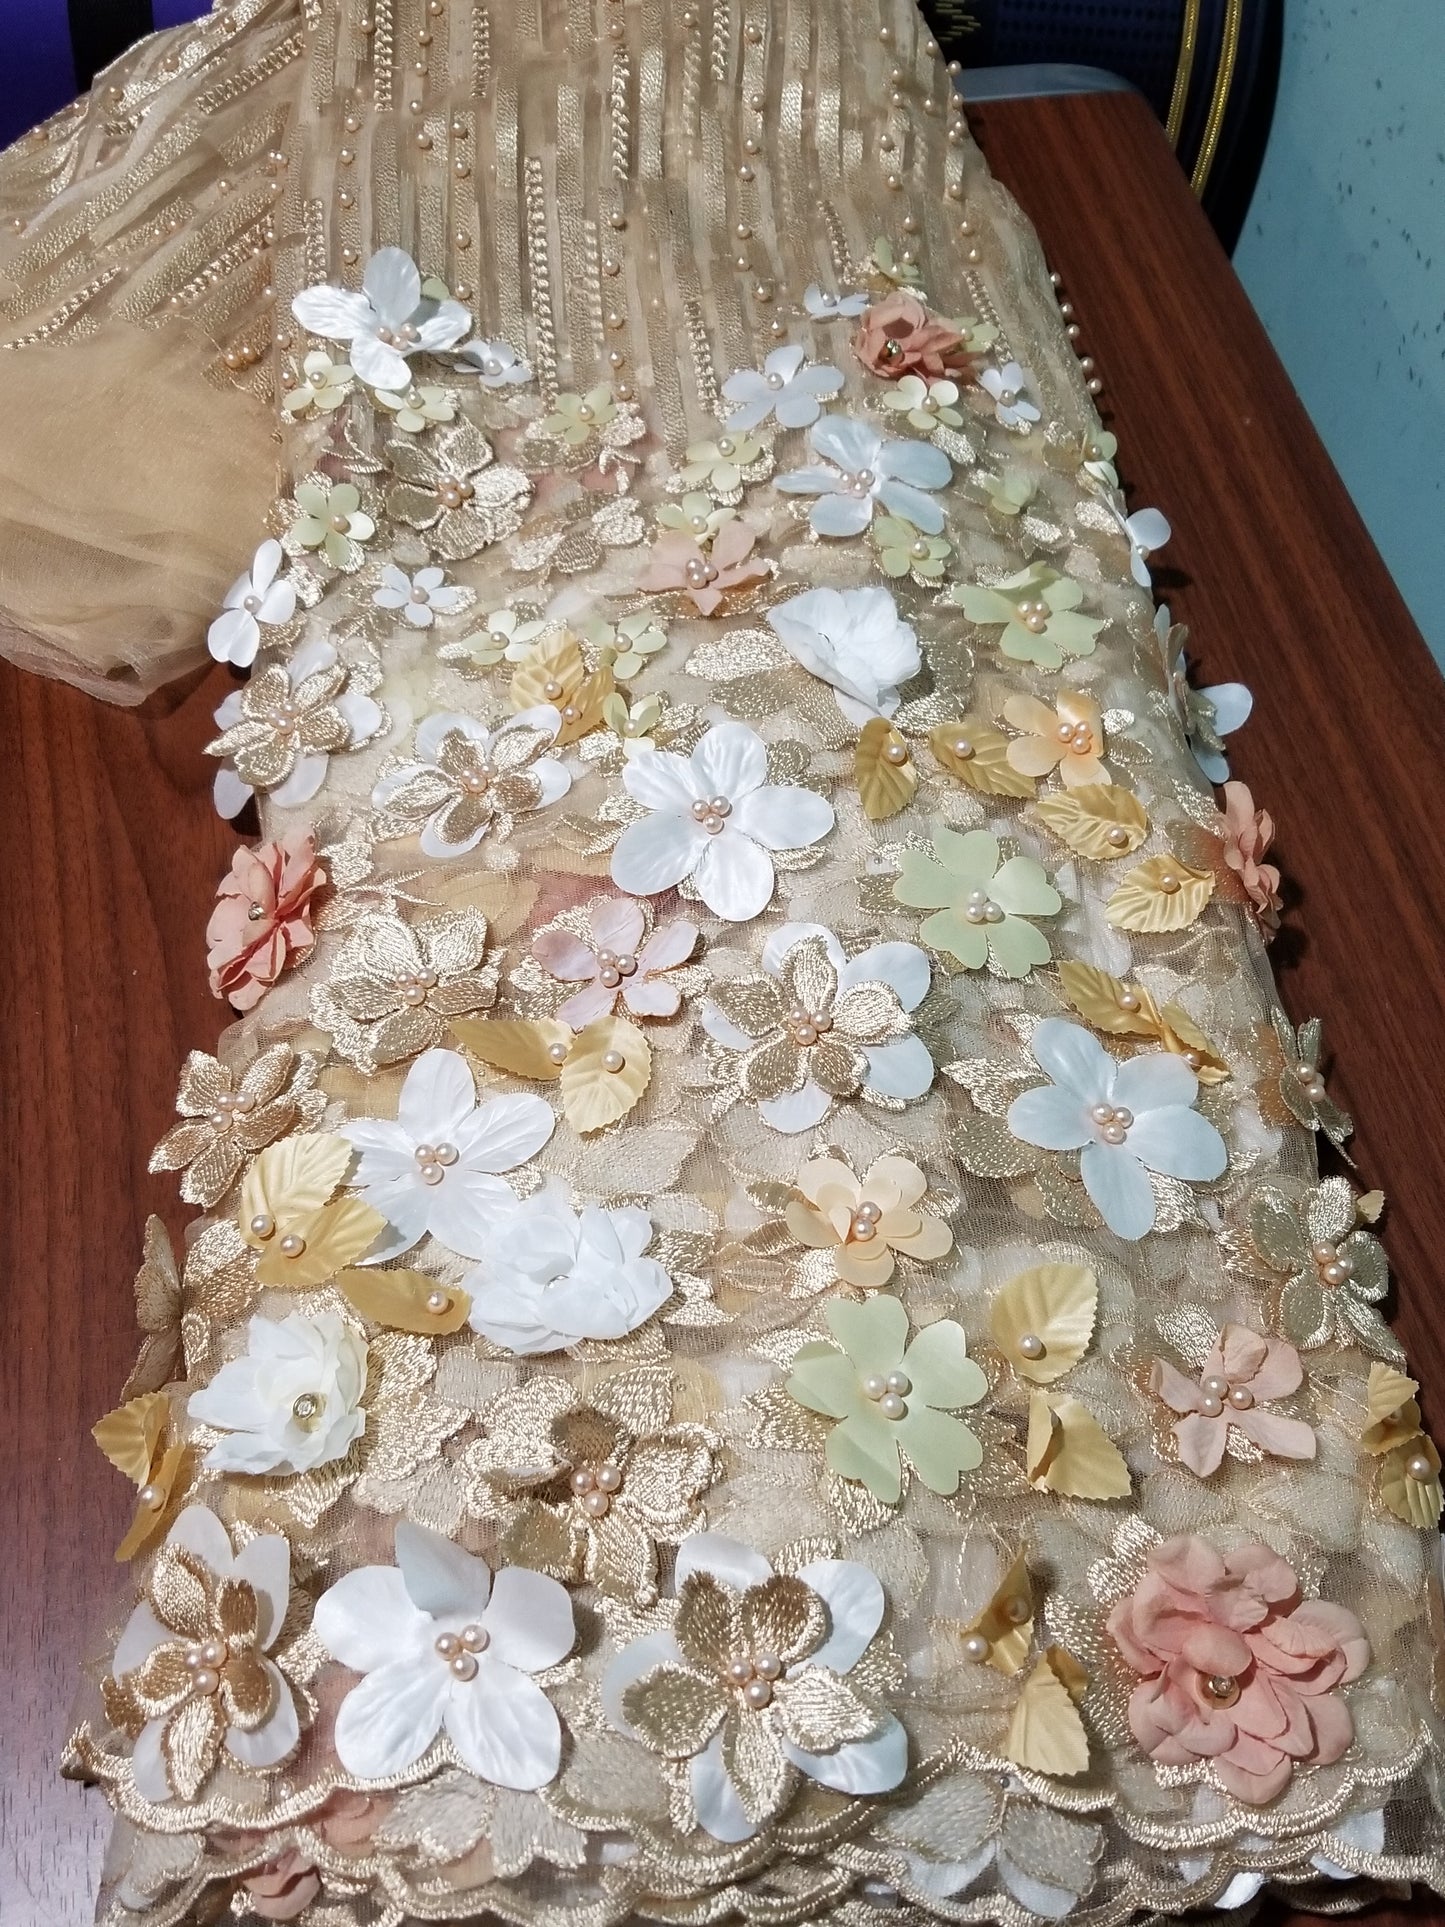 New arrival french lace fabric. Beautiful 3D flower border made to perfection. Ideal for evening gown, or Nigerian traditional wedding outfit. This color is gold with champagn and white petals. Sold per 5yds